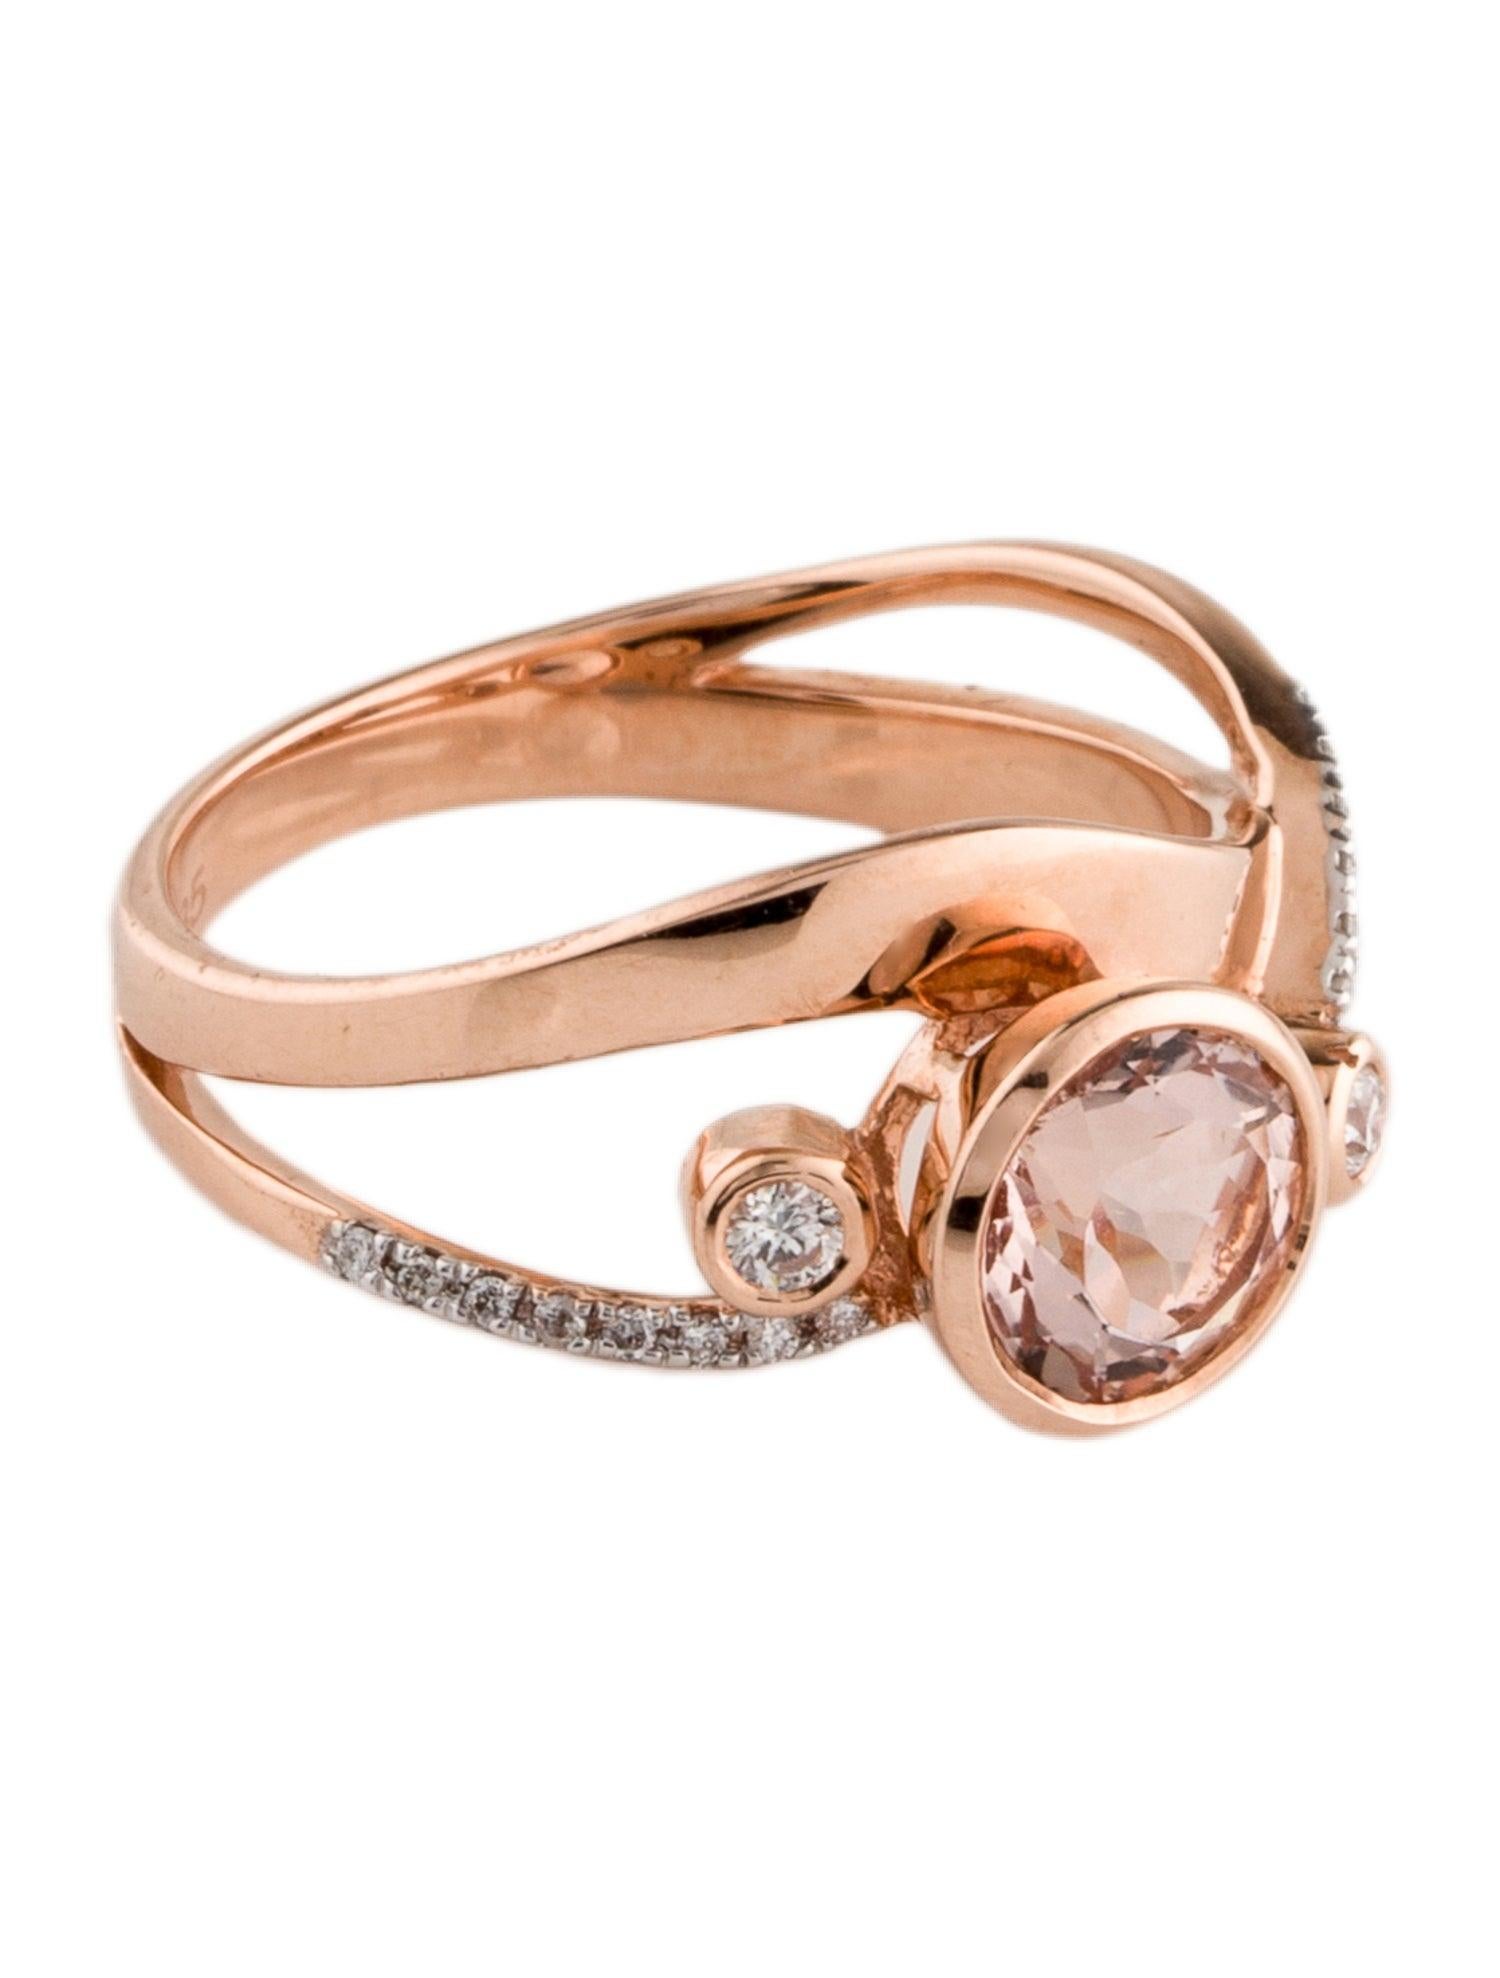 Discover the epitome of elegance with our 14K Rose Gold Cocktail Ring, a stunning blend of sophistication and sparkle. Sized at 7.5, this exquisite piece features a captivating 1.28 carat Round Brilliant Morganite, set in the warm glow of rose gold.